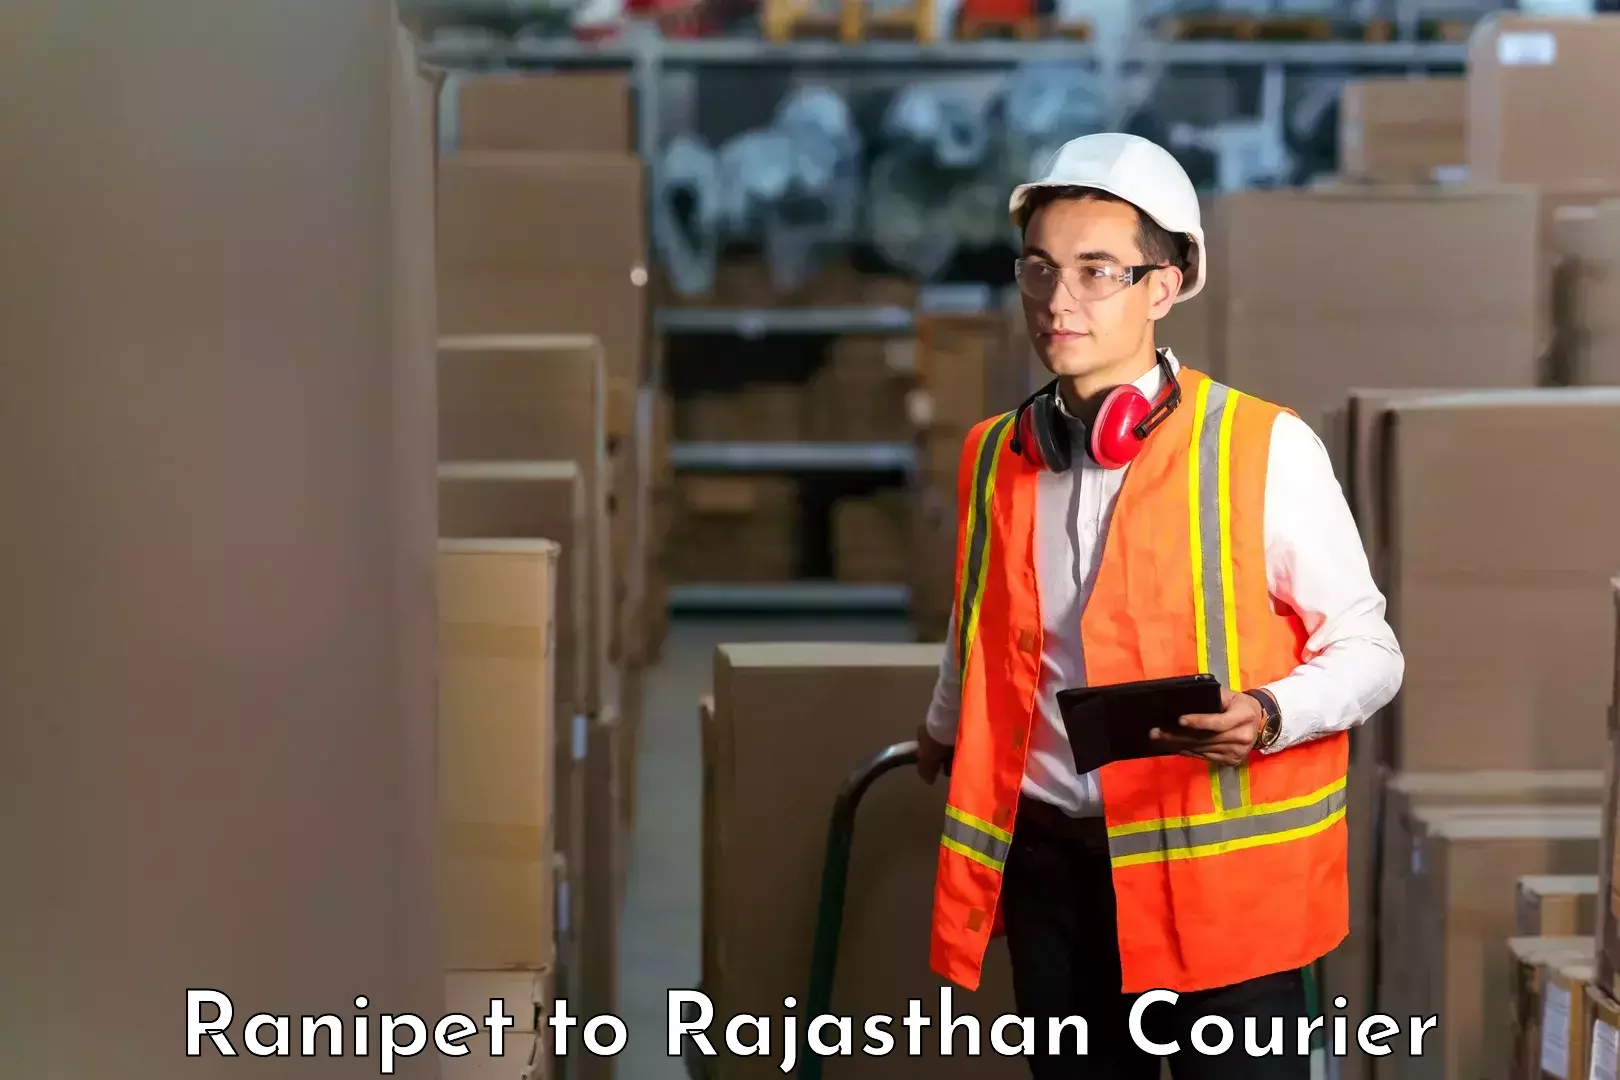 Efficient order fulfillment Ranipet to Rajasthan